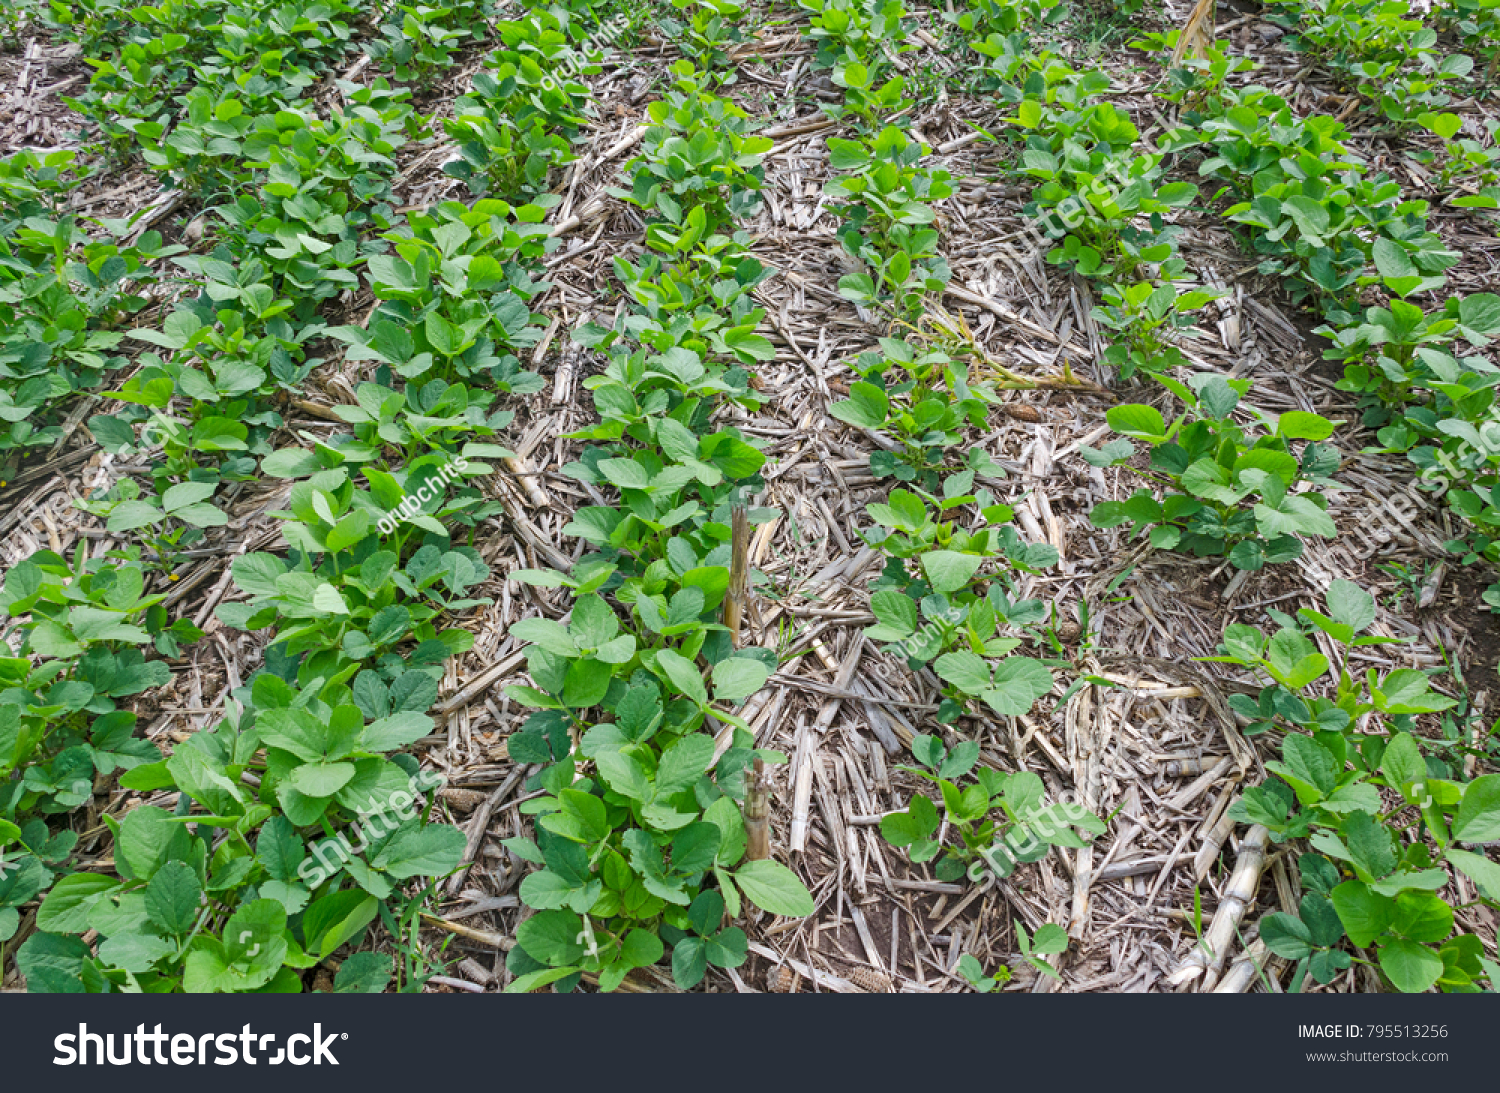 the soybeans were no-till in Argentina #795513256